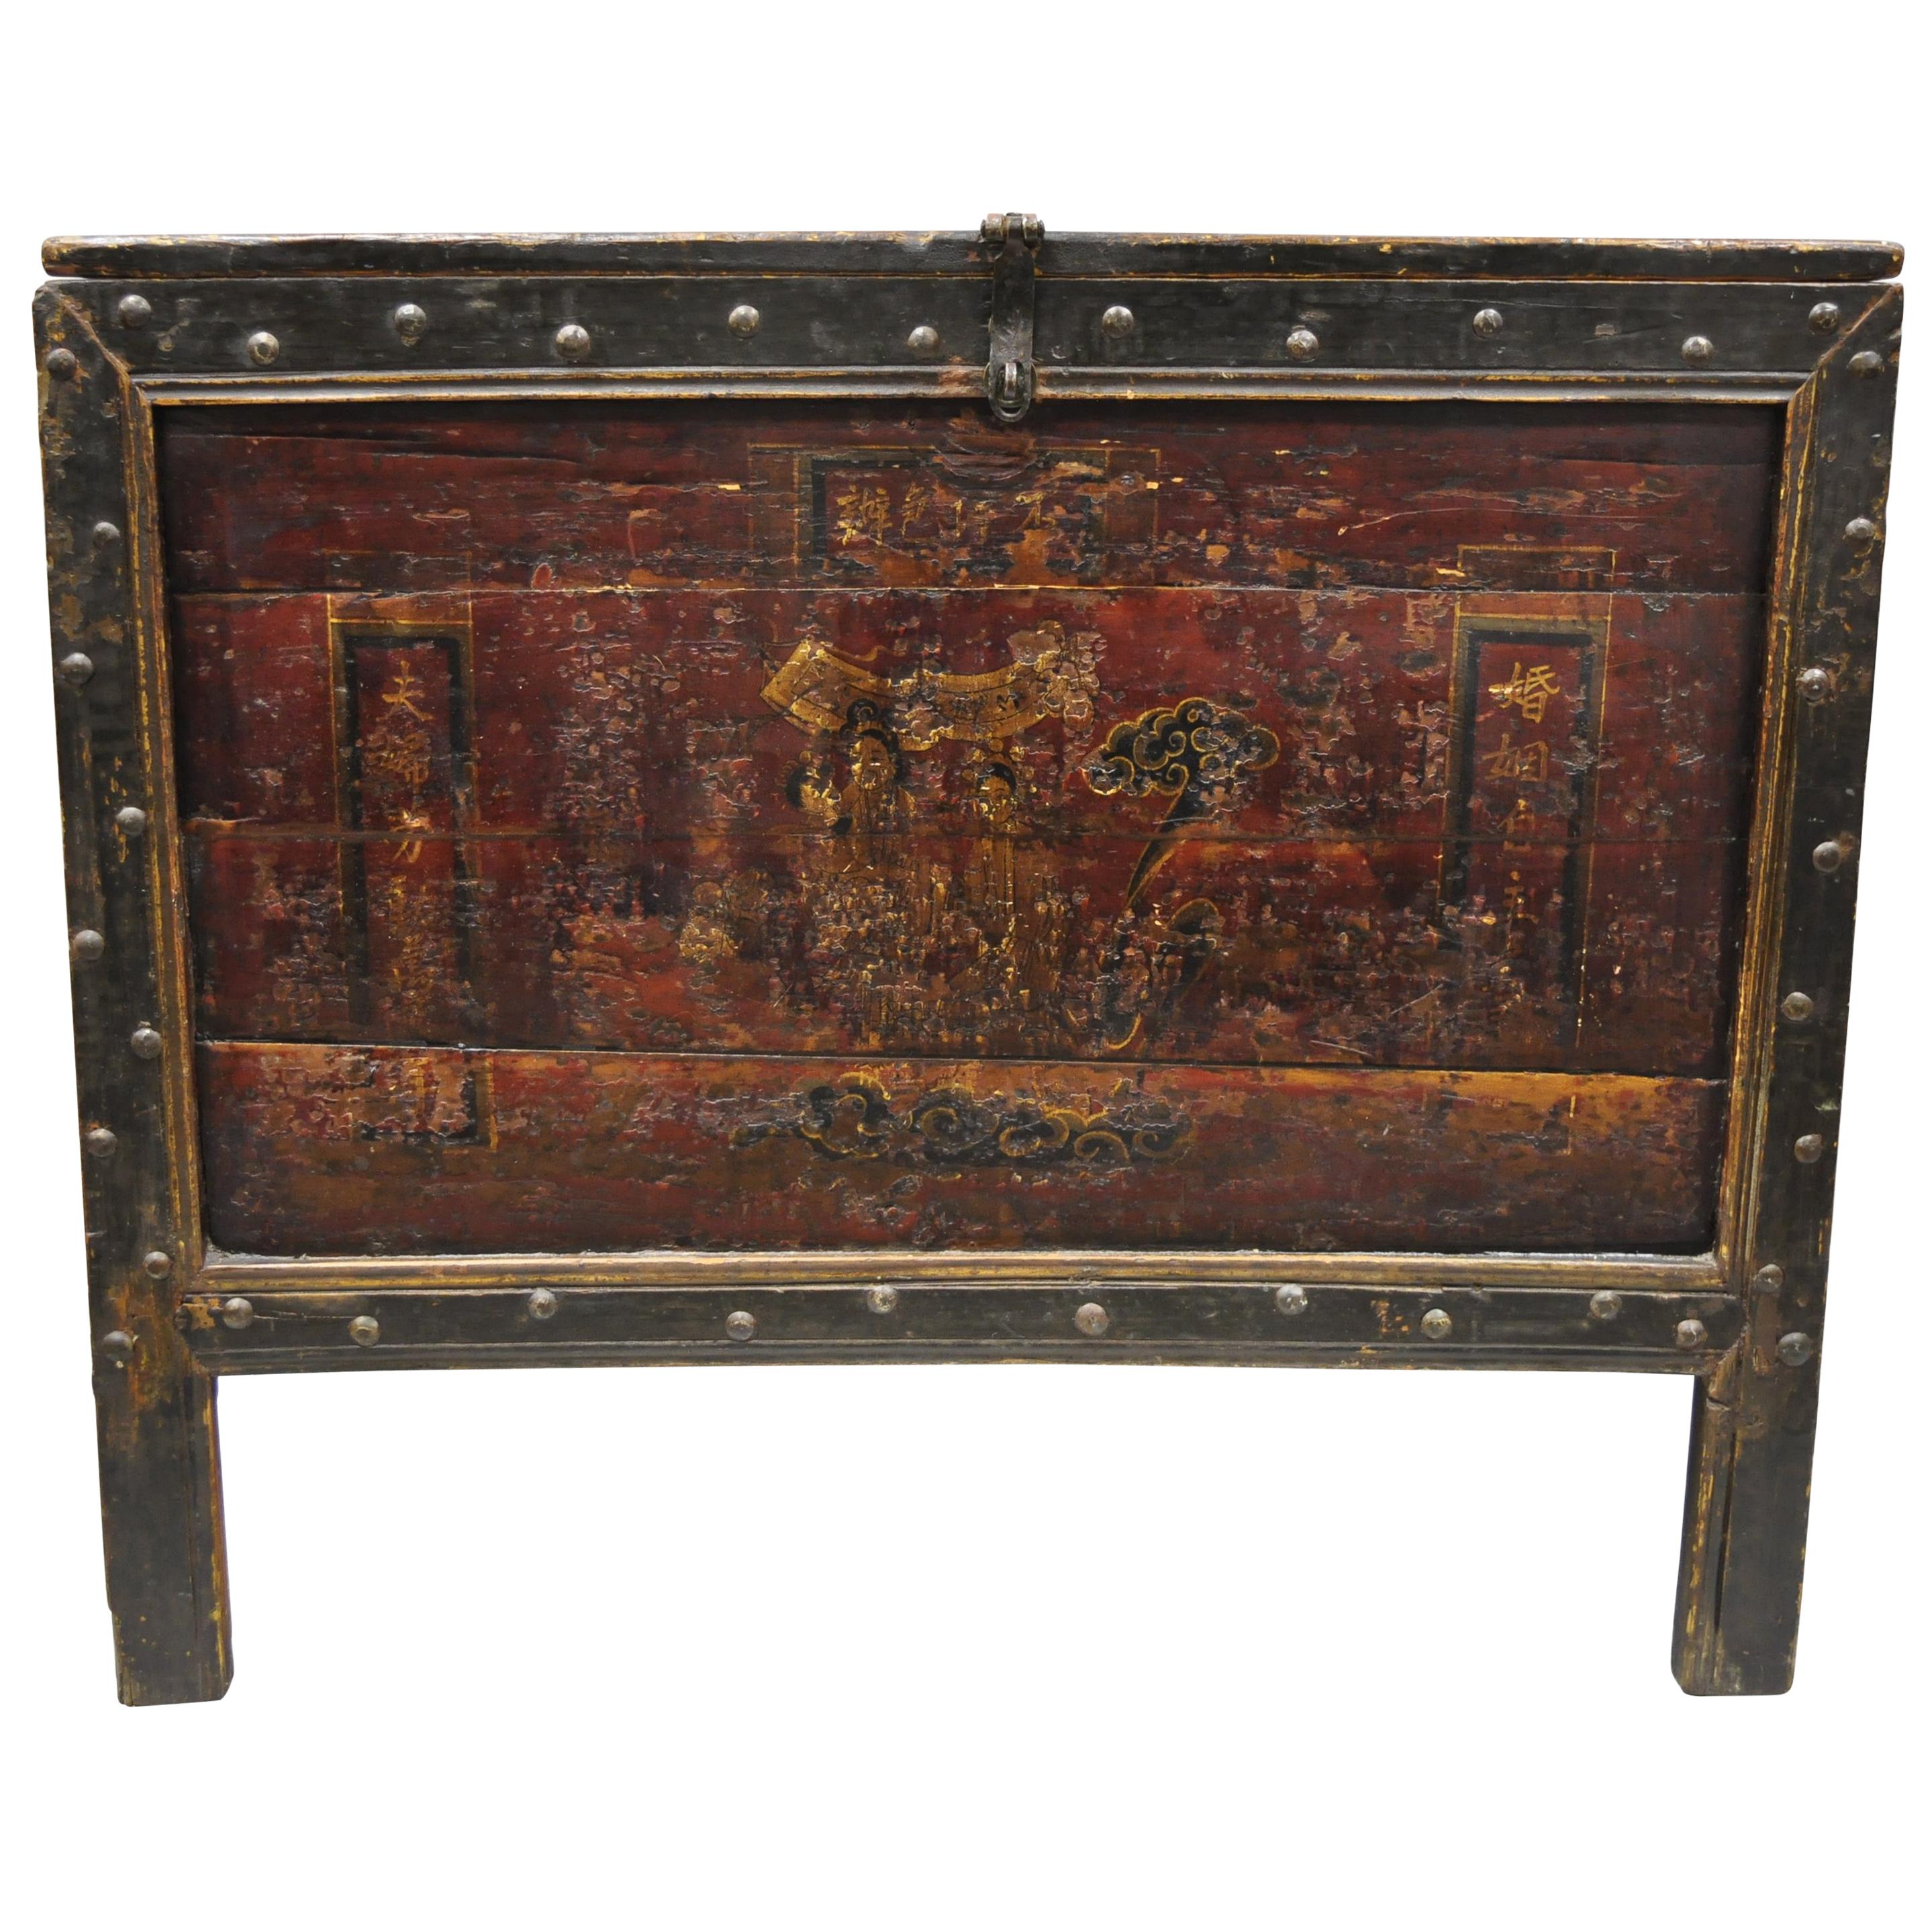 19th Century Red Lacquer Tibetan Mongolian Painted Asian Blanket Chest Grain Bin For Sale